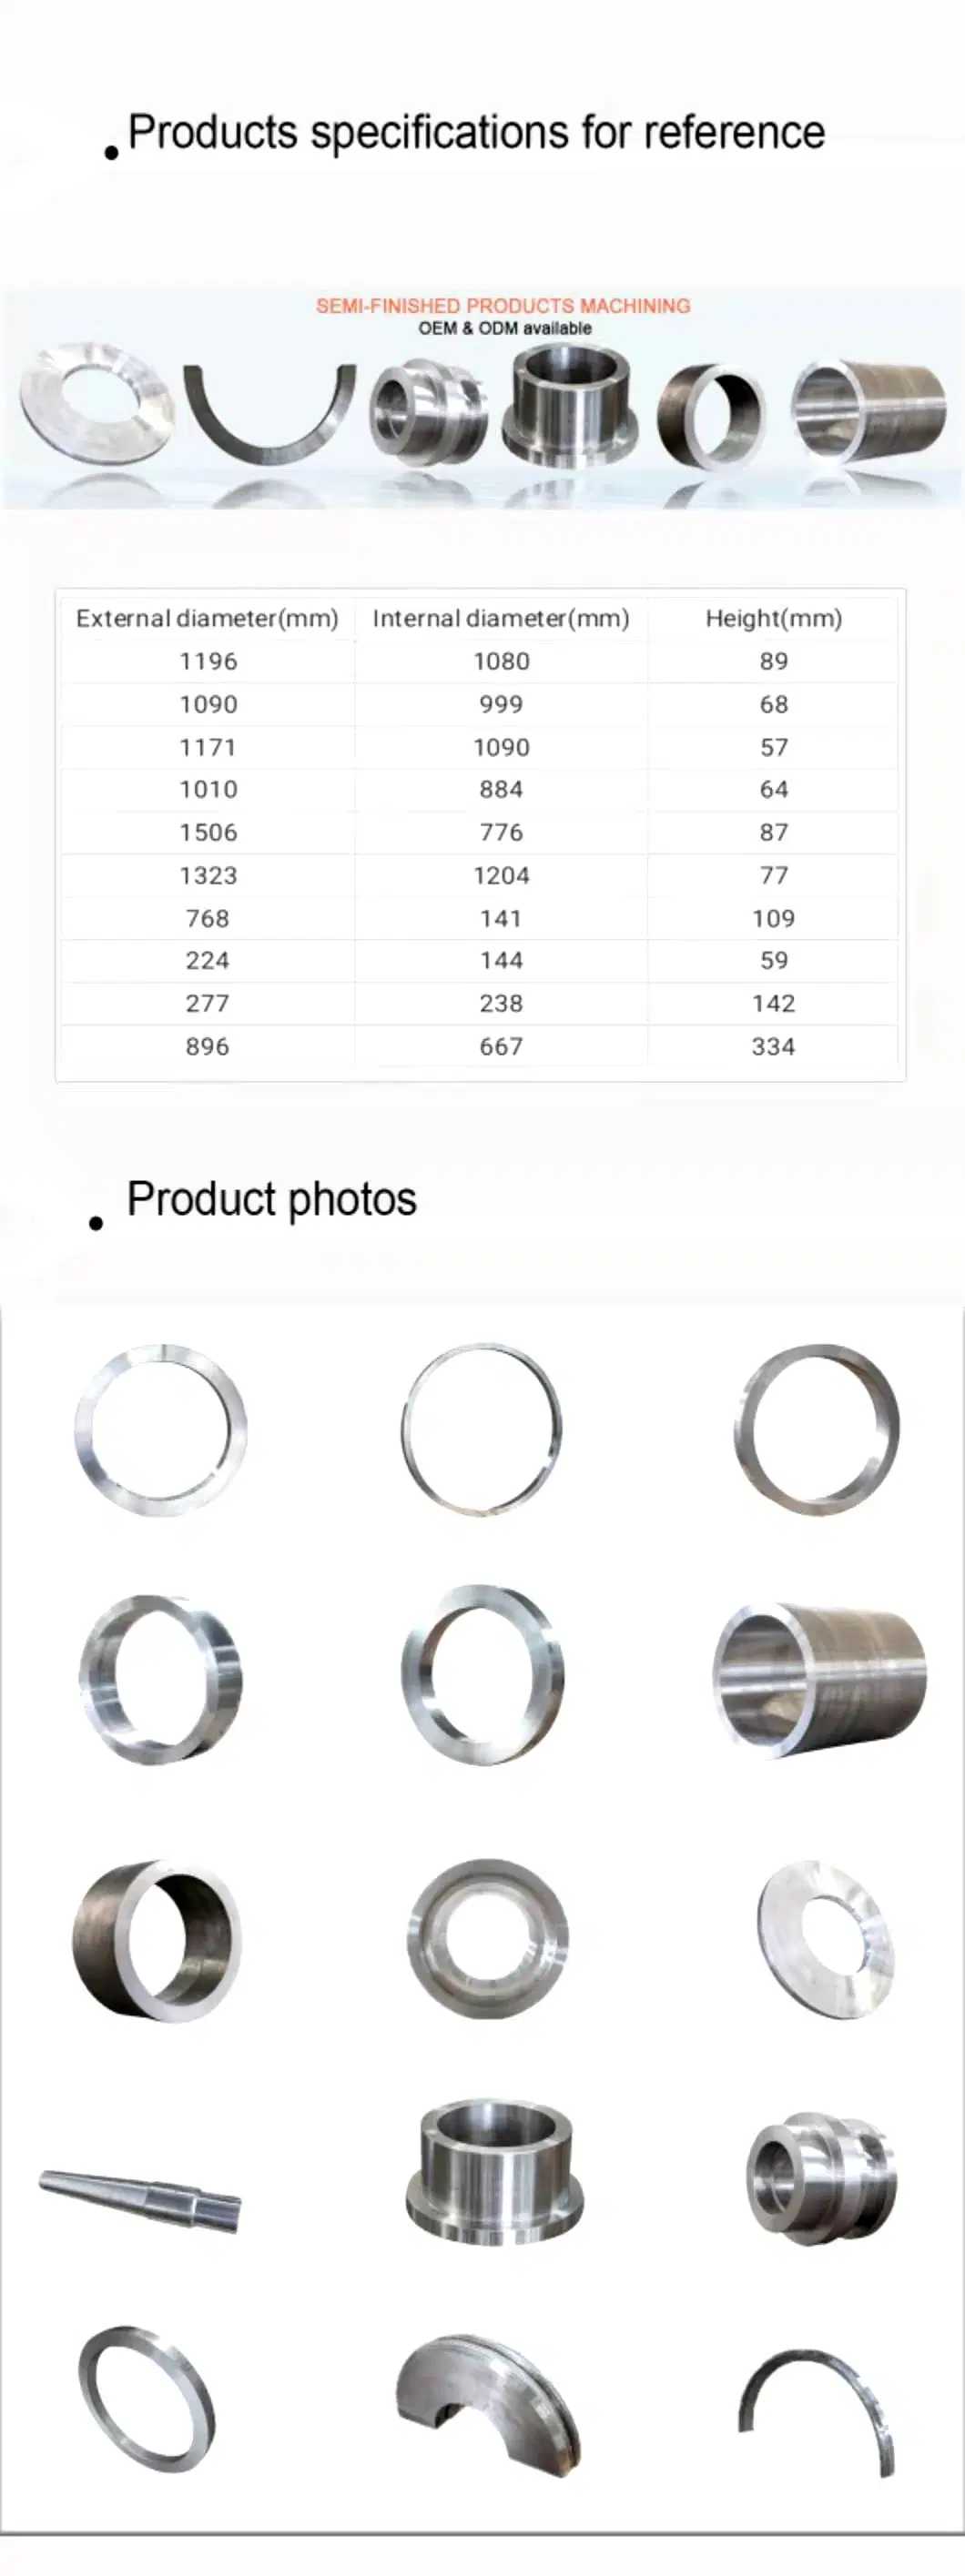 Forged Ring Die of High Quality for Pellet Product